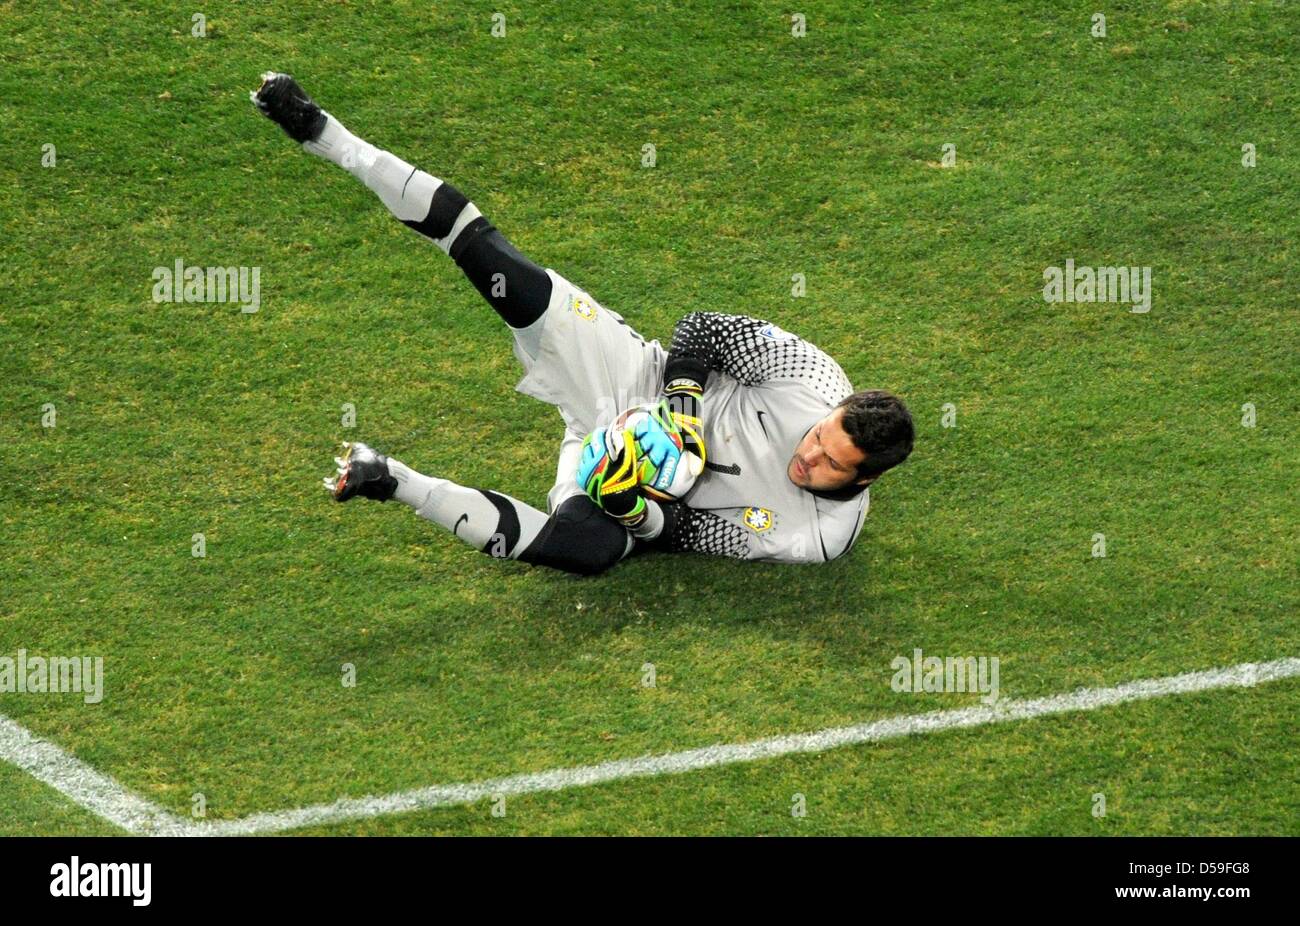 Goalkeeper Julio Cesar of Brazil makes a save during the FIFA World Cup 2010 group G match between Brazil and Ivory Coast at the Soccer City Stadium in Johannesburg, South Africa 20 June 2010. Photo: Marcus Brandt dpa - Please refer to http://dpaq.de/FIFA-WM2010-TC Stock Photo